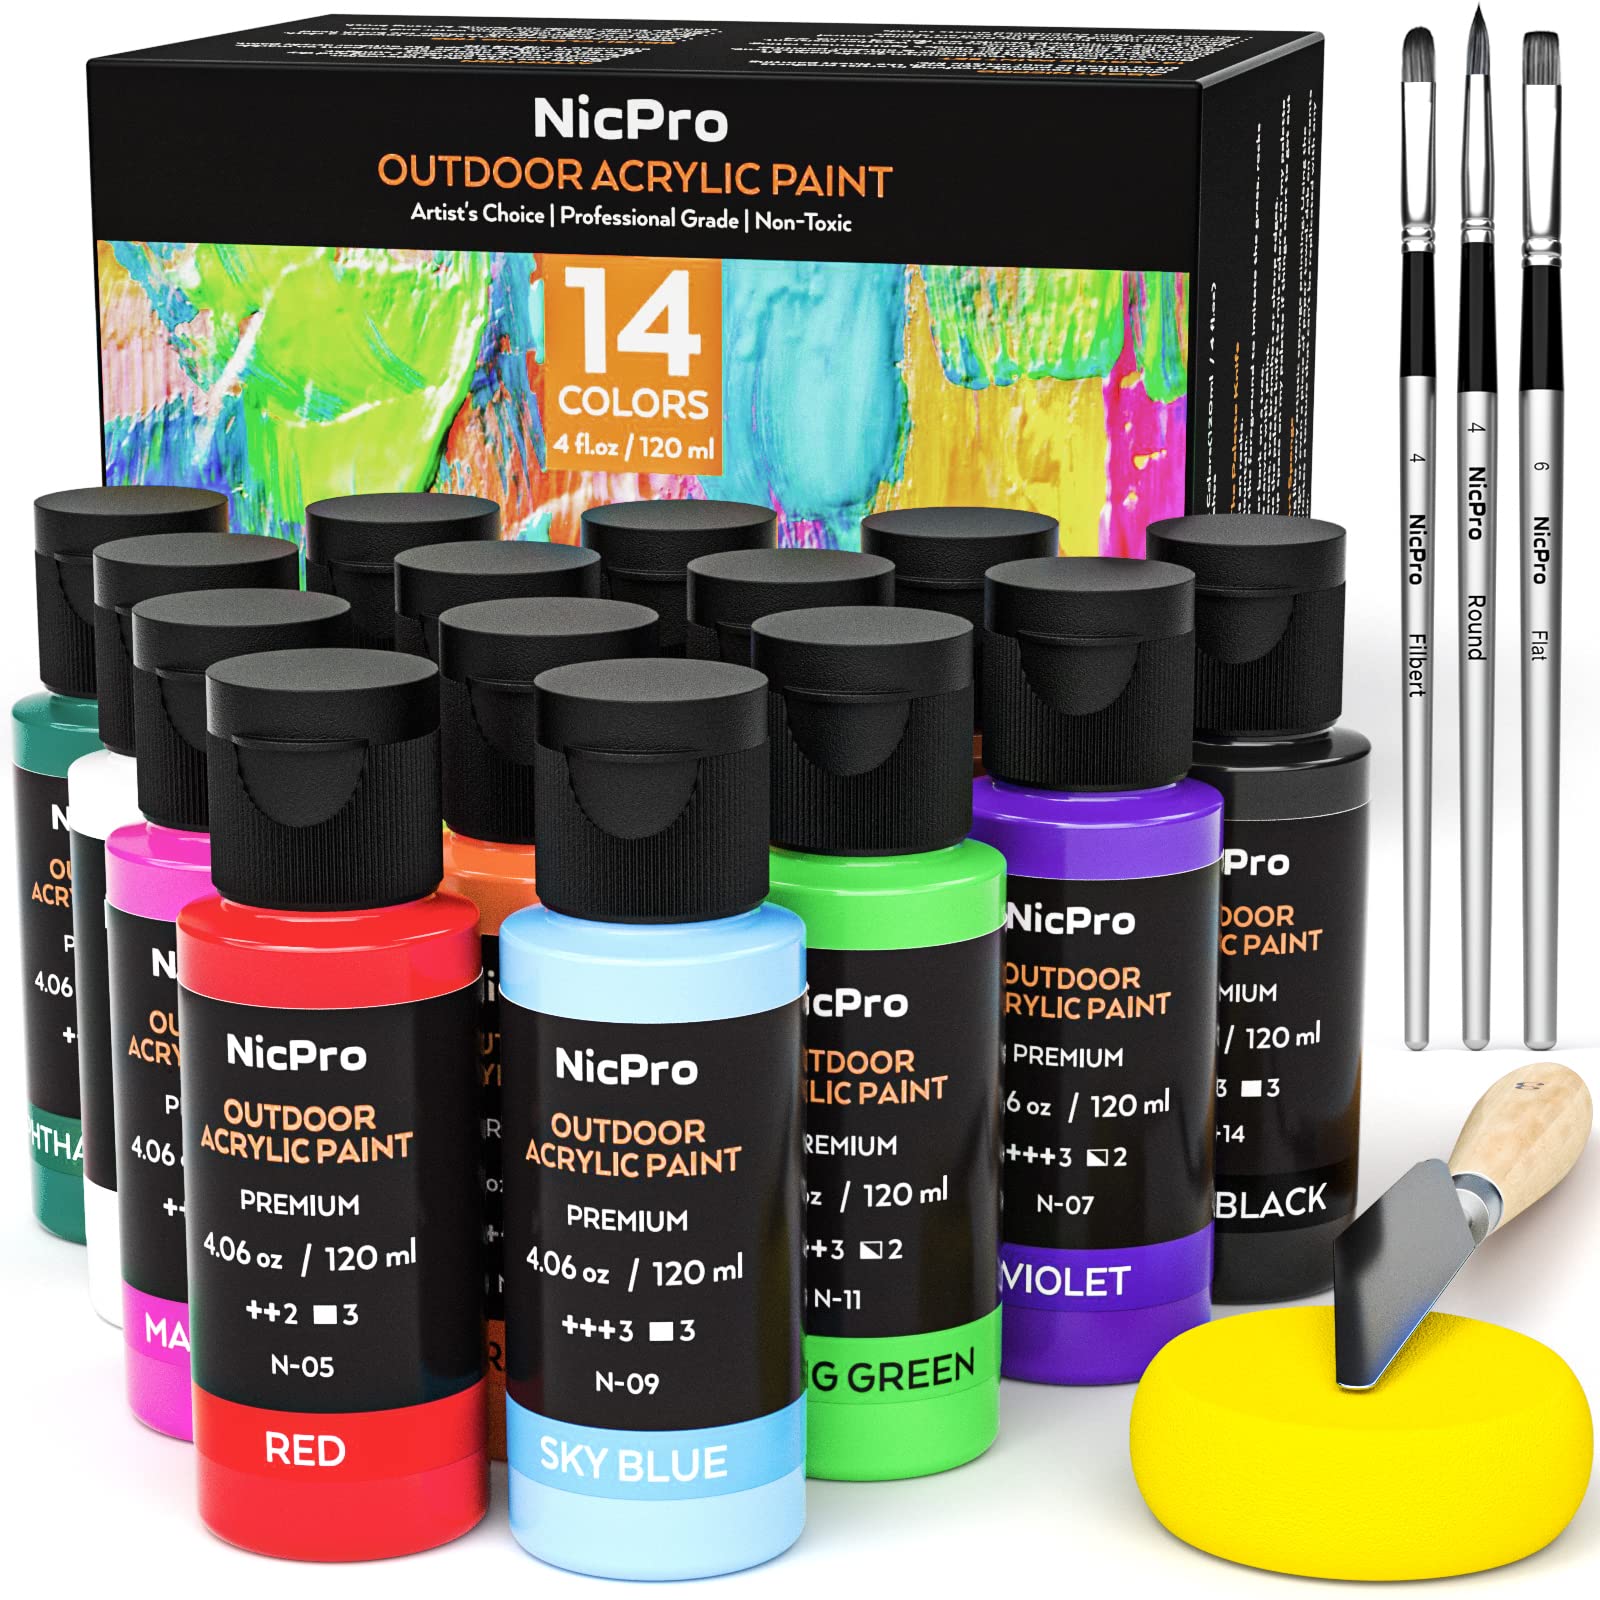 Nicpro 14 Colors 4.06 oz Outdoor Acrylic Paint Bulk with Brush and Sponge, Knife, Non-Toxic Paint for Multi-surface Rock, Wood, Fabric, Leather, Crafts, Canvas, Shoes and Wall Painting